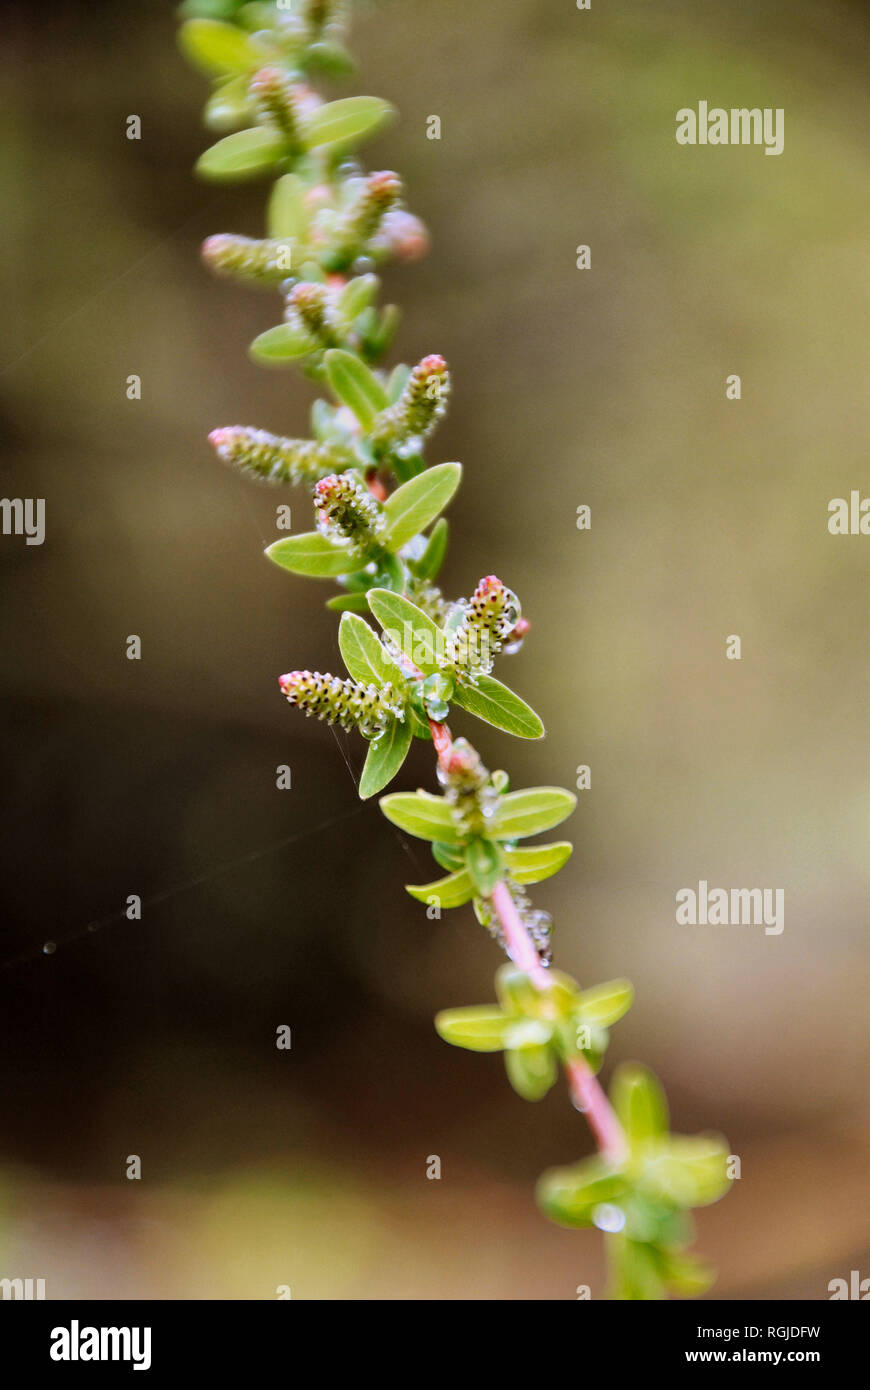 Closeup of a branch with green and pink tiny leaves and buds in bloom, in spring, with water droplets in bright day light Stock Photo